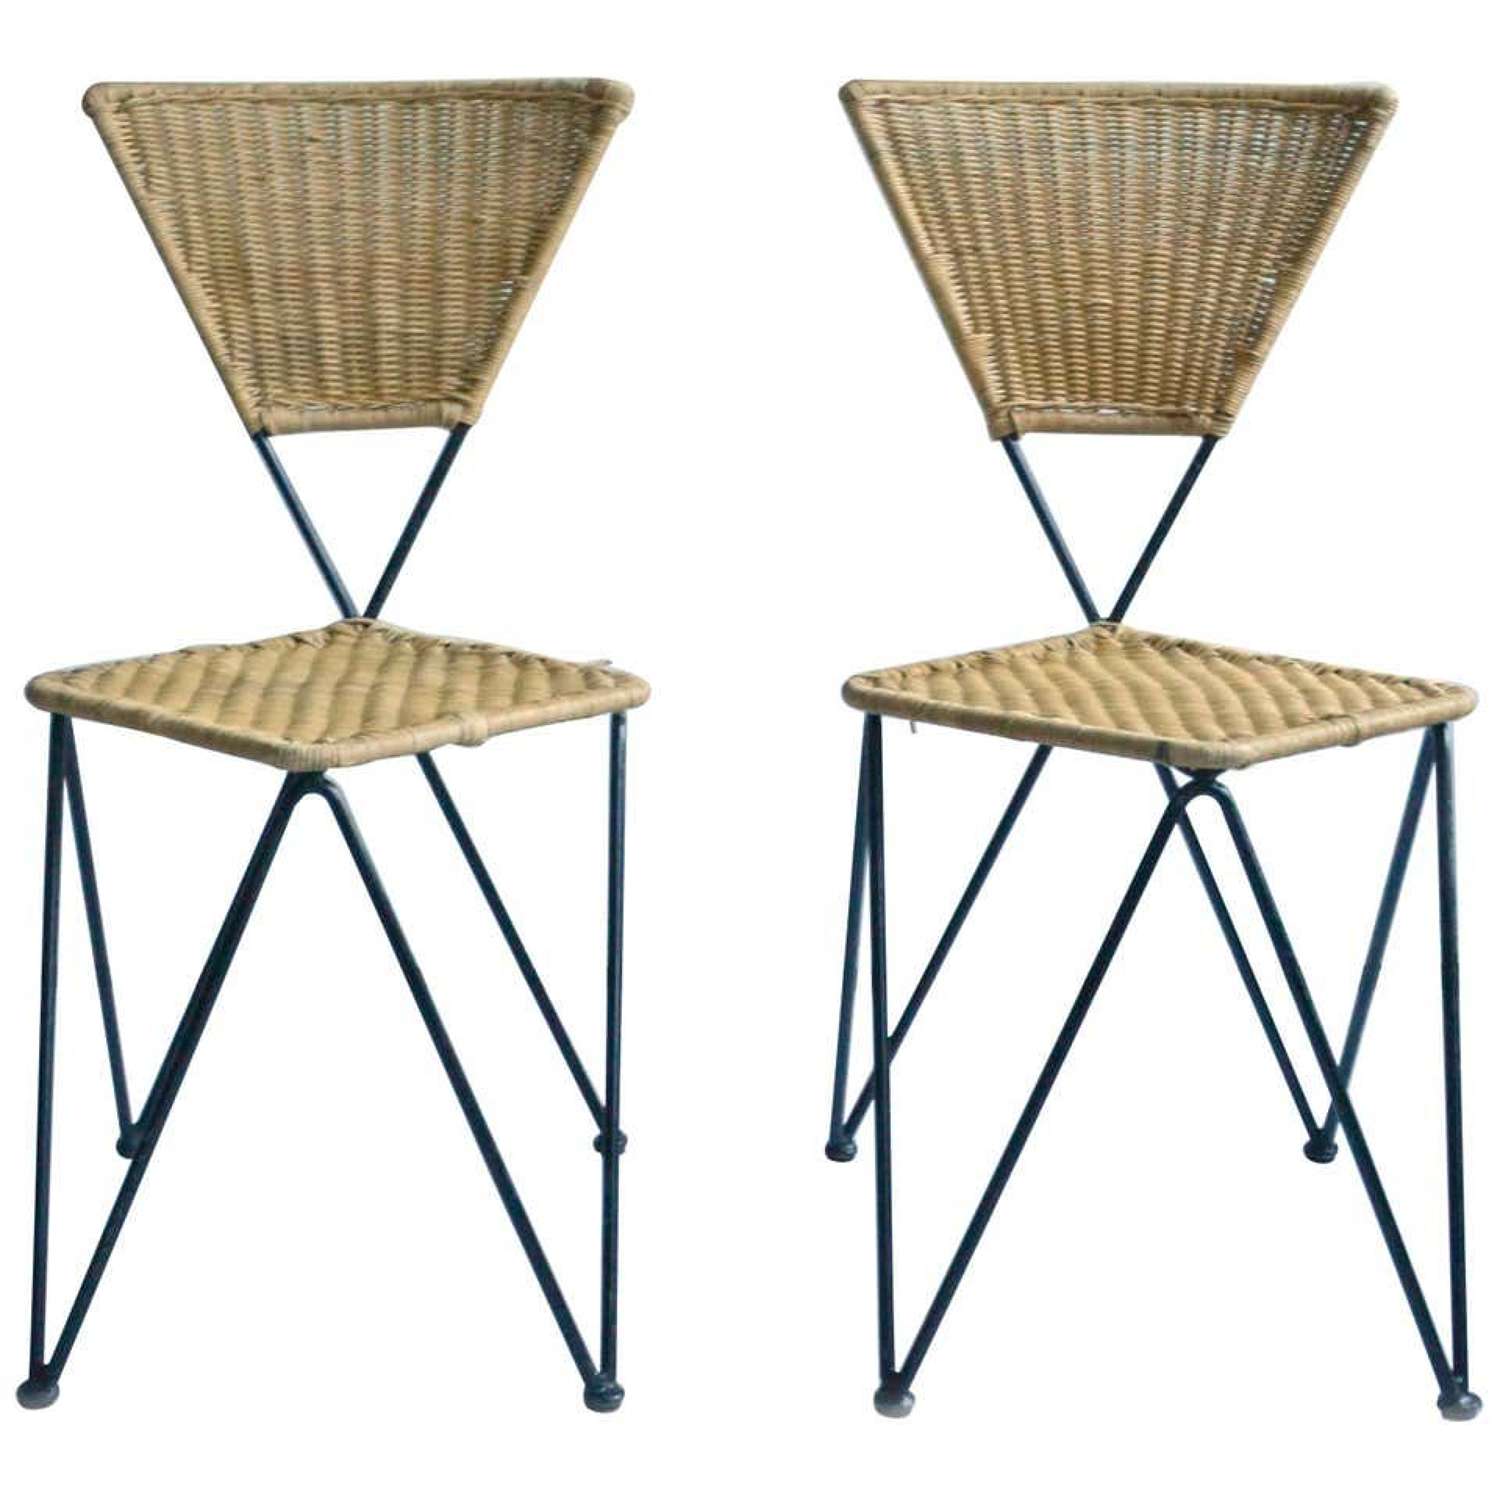 Pair of Wicker and Metal Dining Chairs, Vienna 1950's